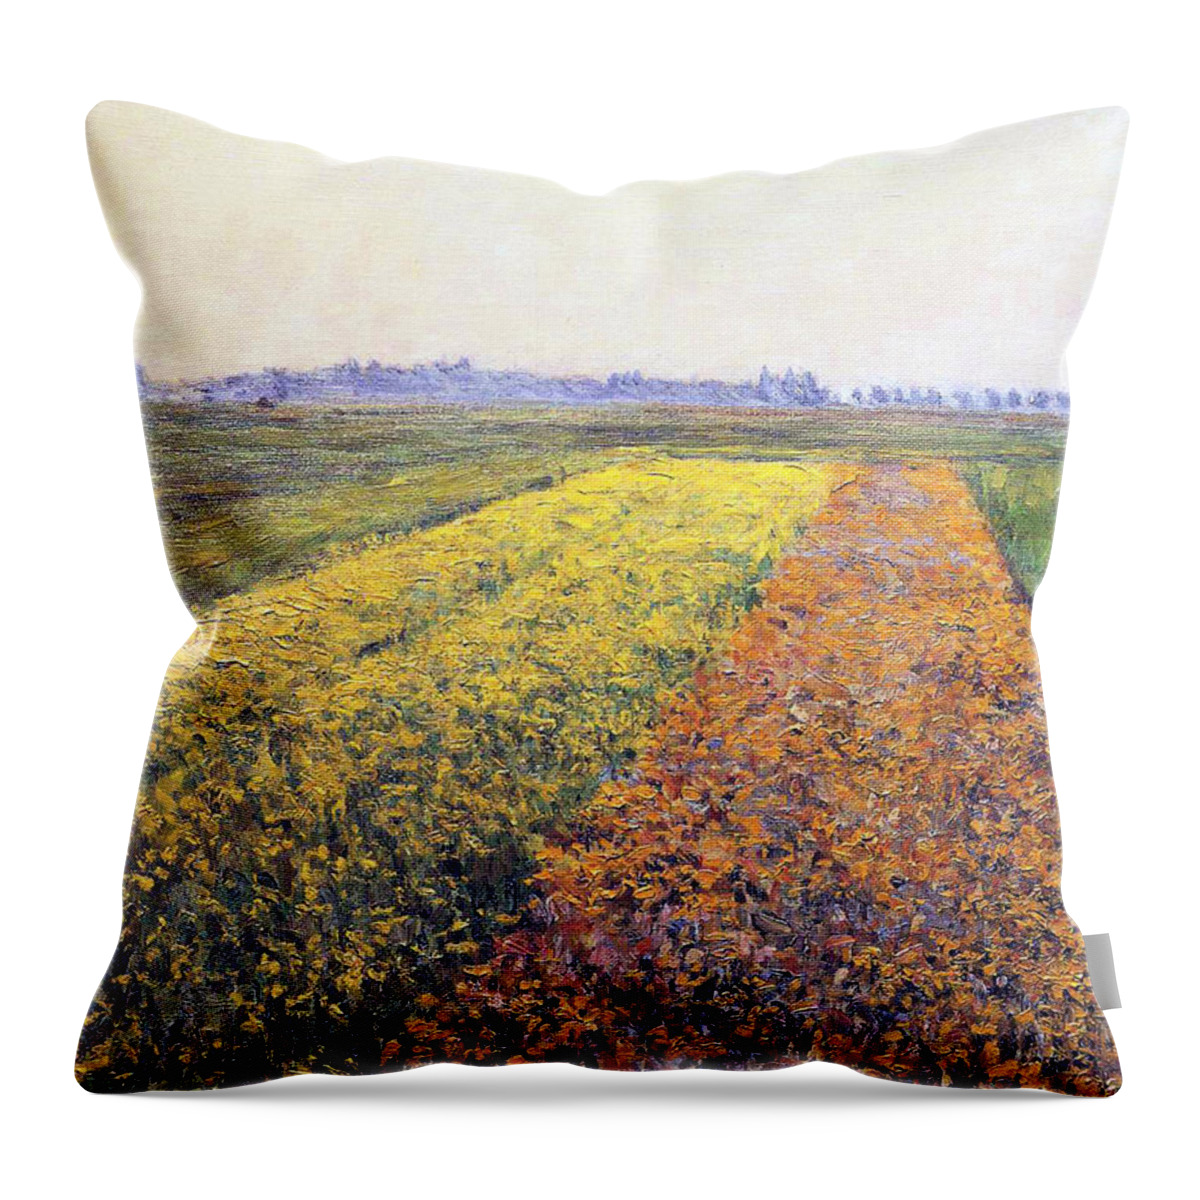 Land Throw Pillow featuring the painting Landscape by Gustave Caillebotte